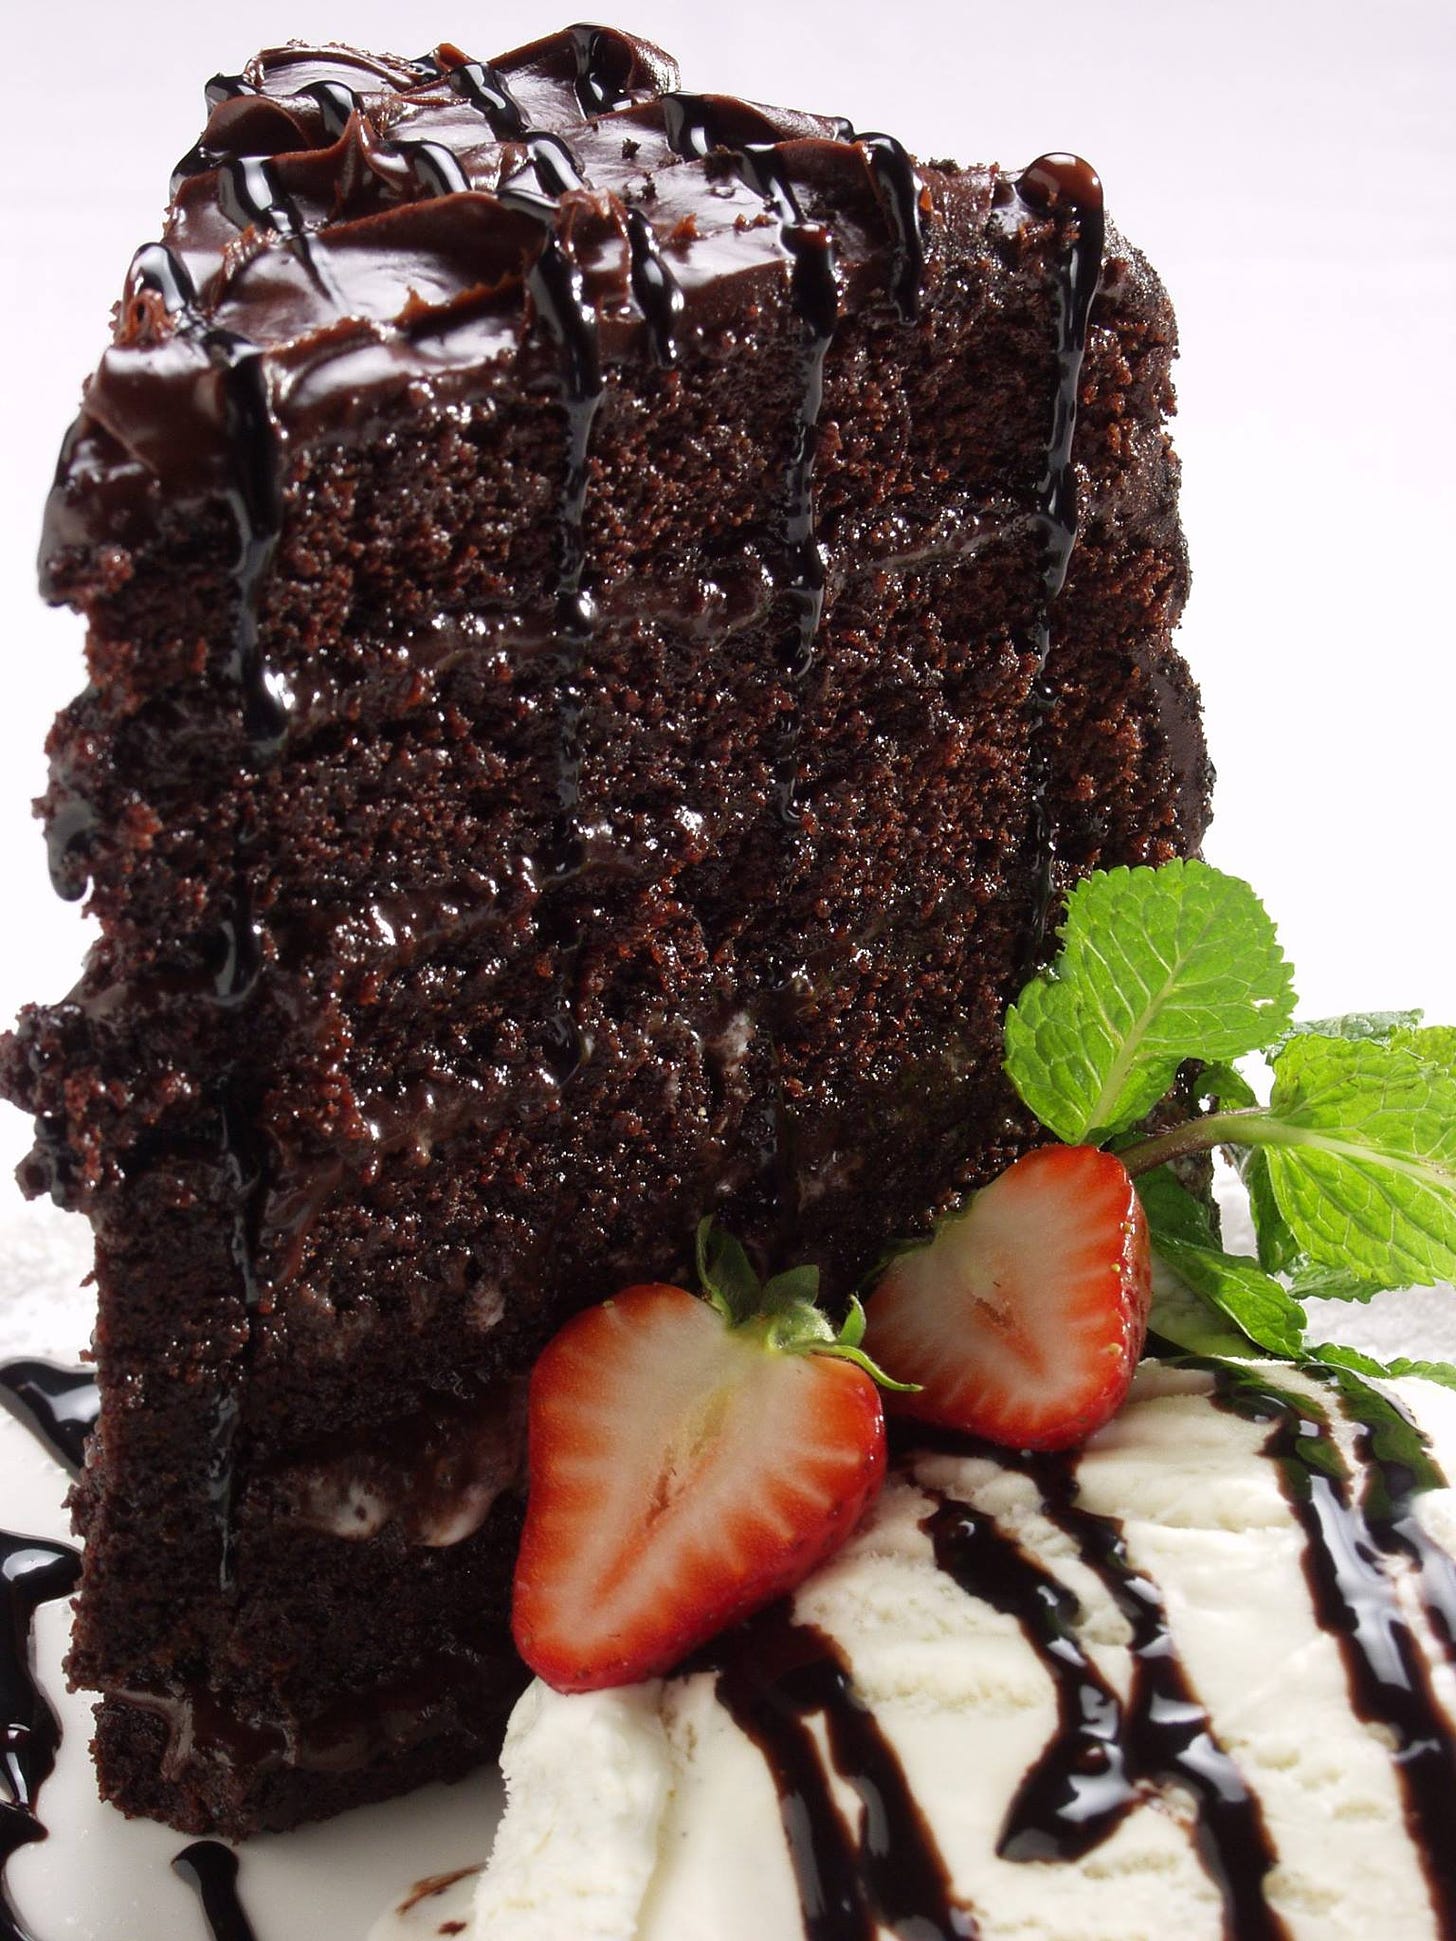 A very yummy piece of chocolate cake, ice cream and strawberries.